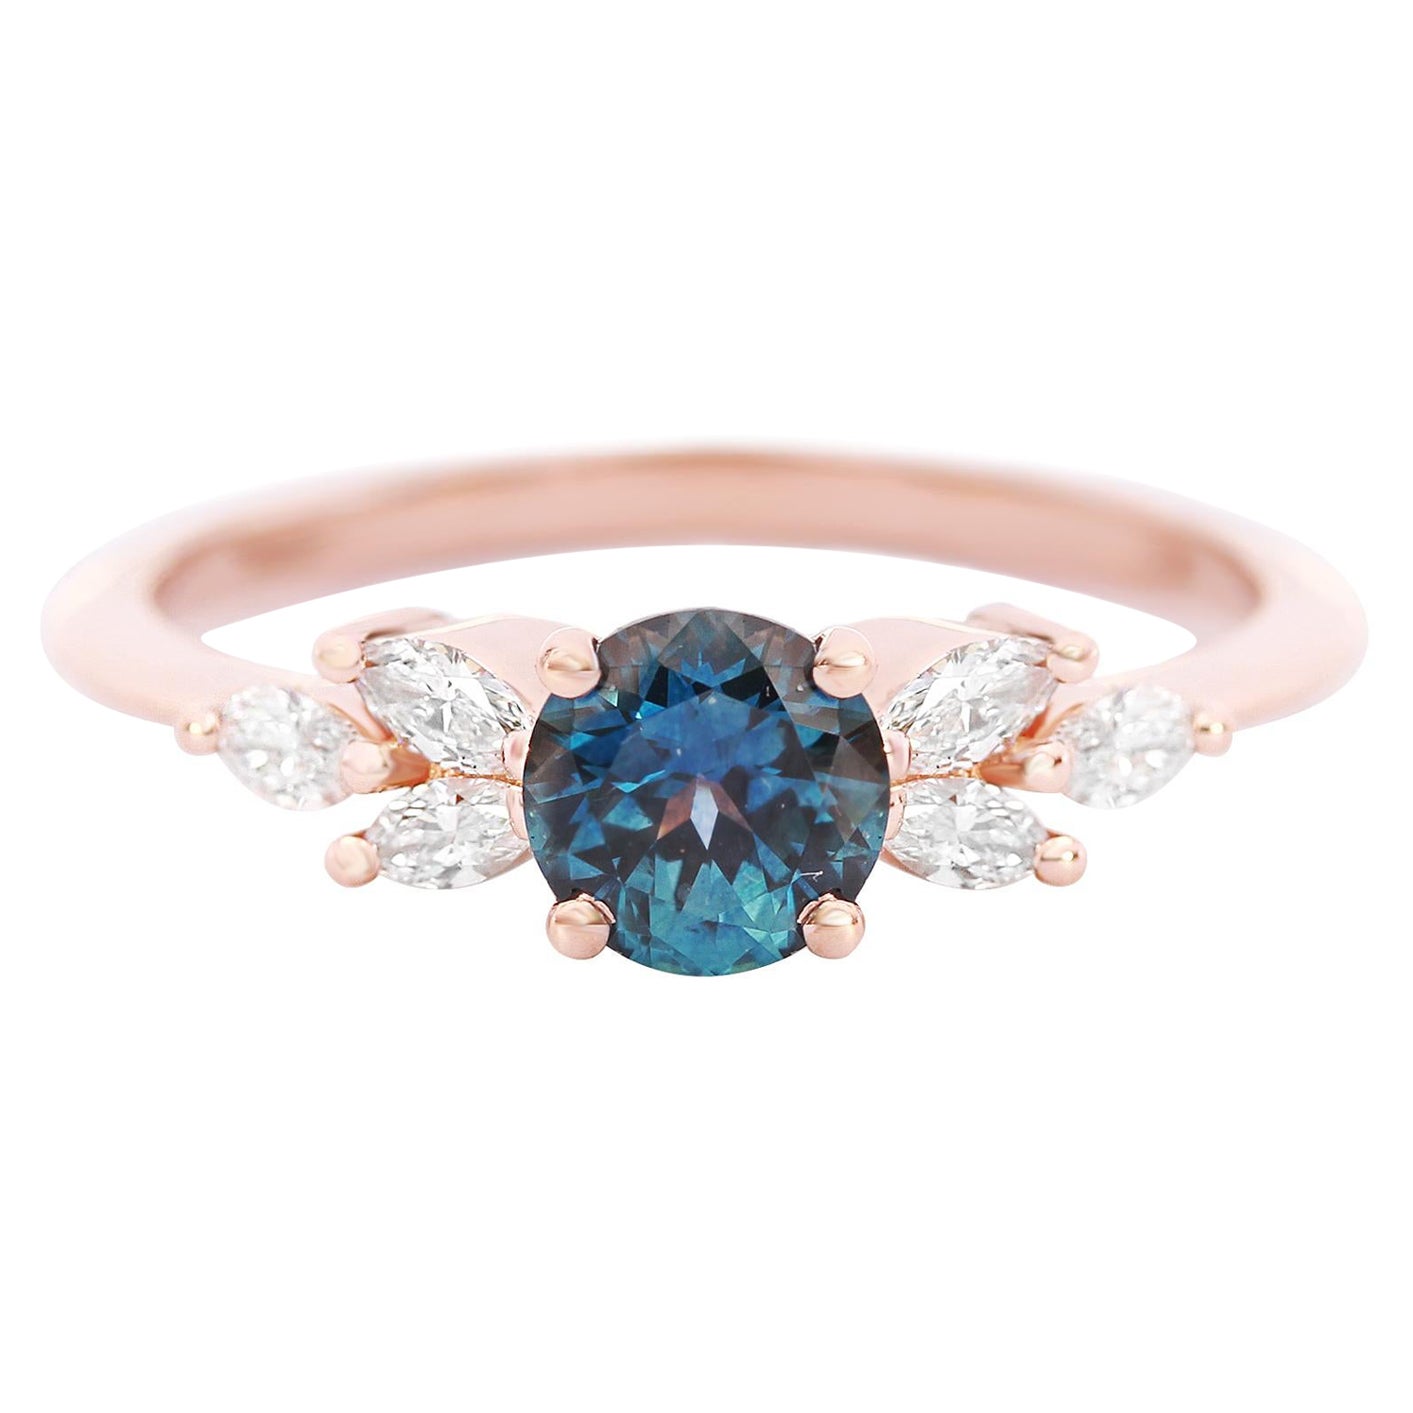 For Sale:  Montana Blue Sapphire and Marquise Diamonds, Gemstone Engagement Ring Penelope